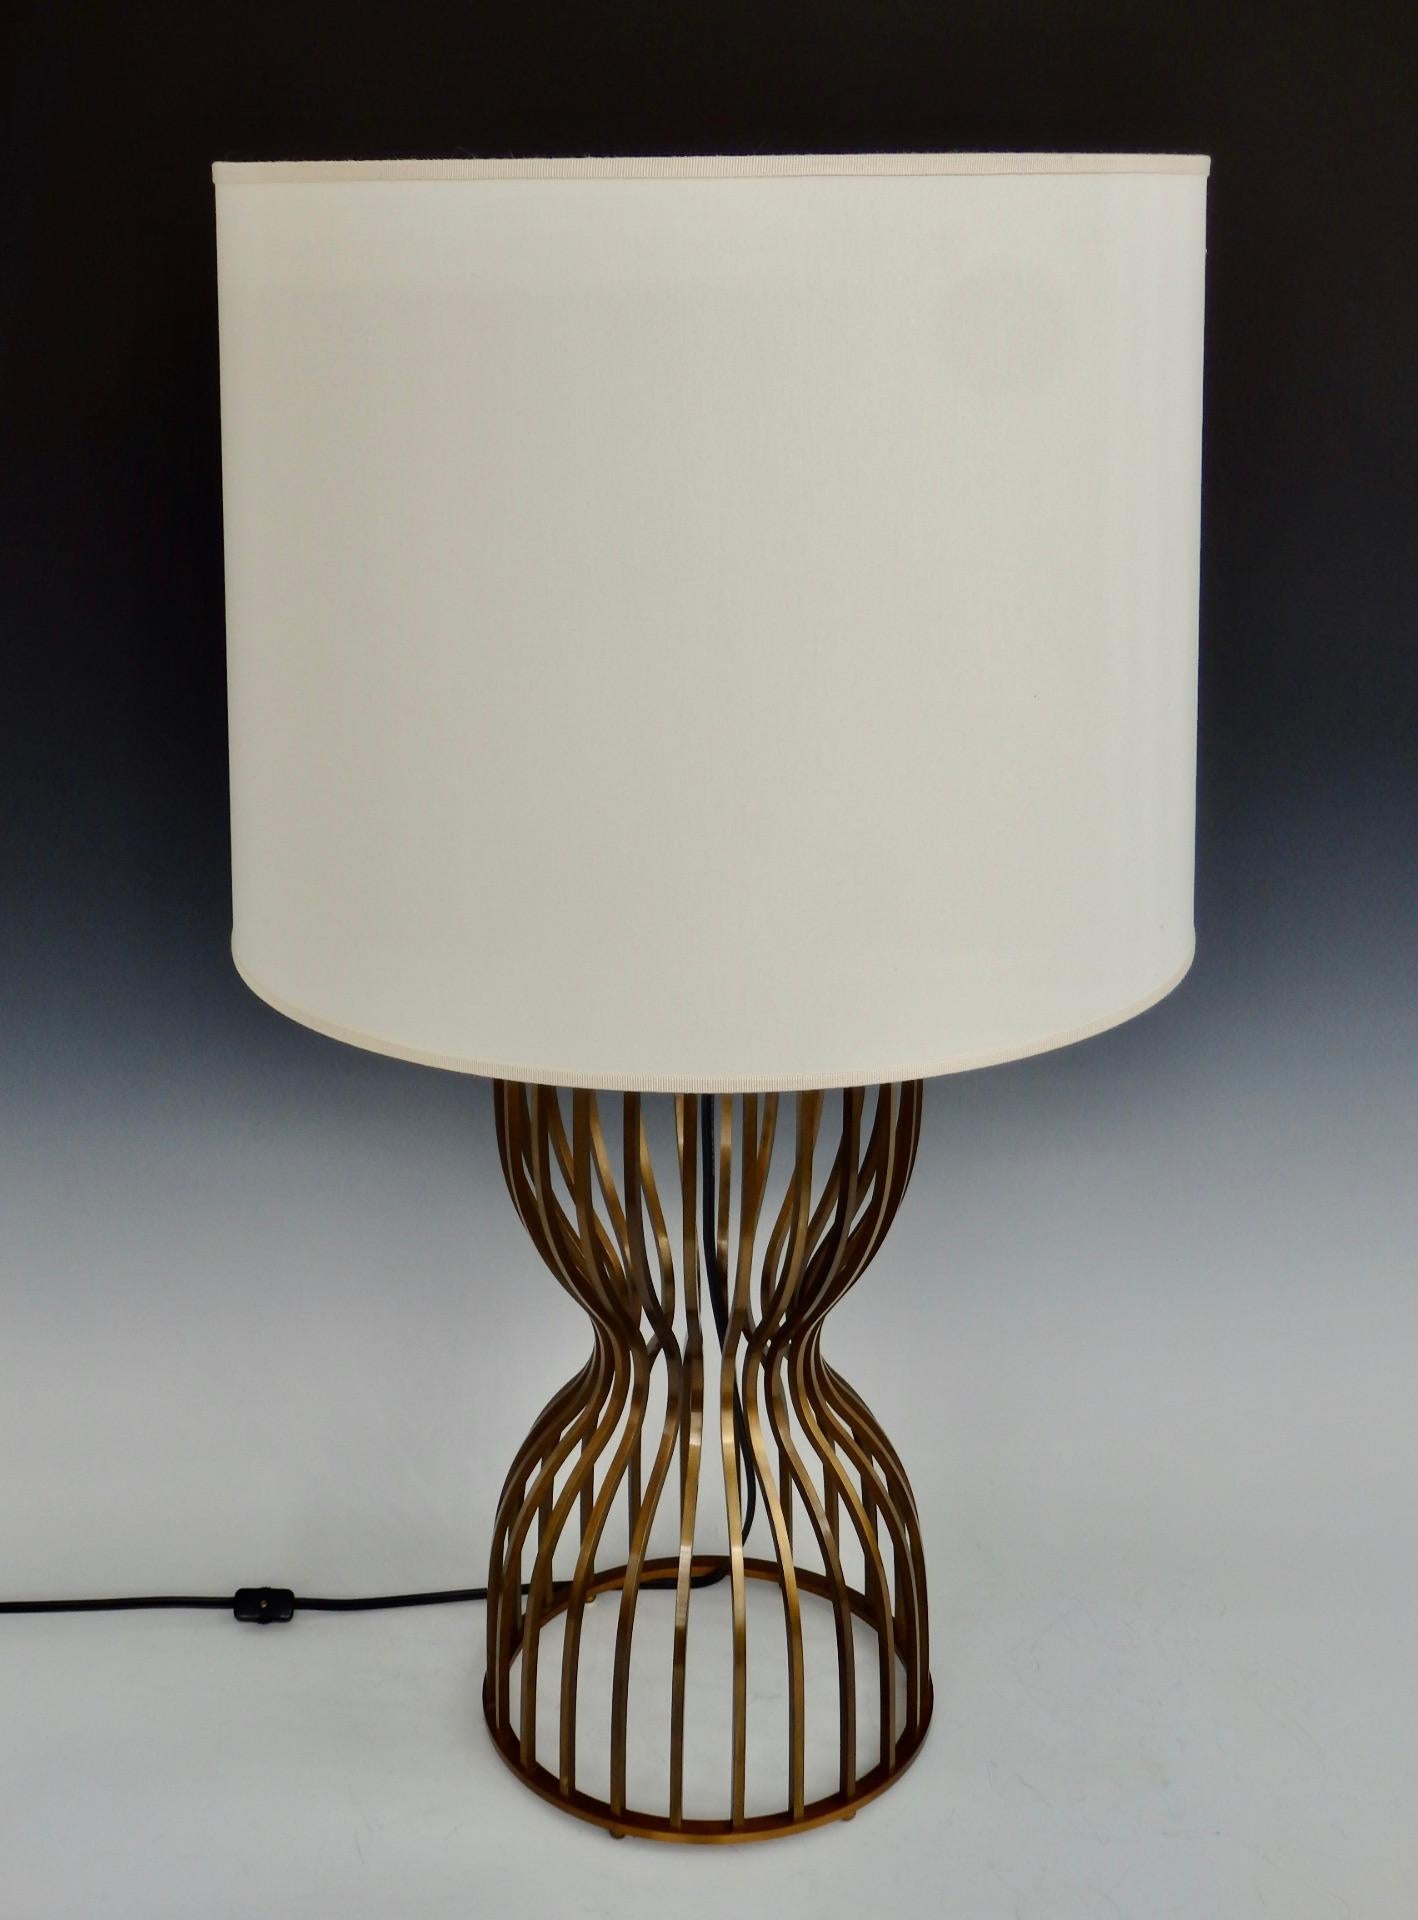 Nicely machined brass components form hour glass or dress form base. Designed by Barbara Barry. Machined and assembled in Italy for Baker furniture. Lamp has 9.75